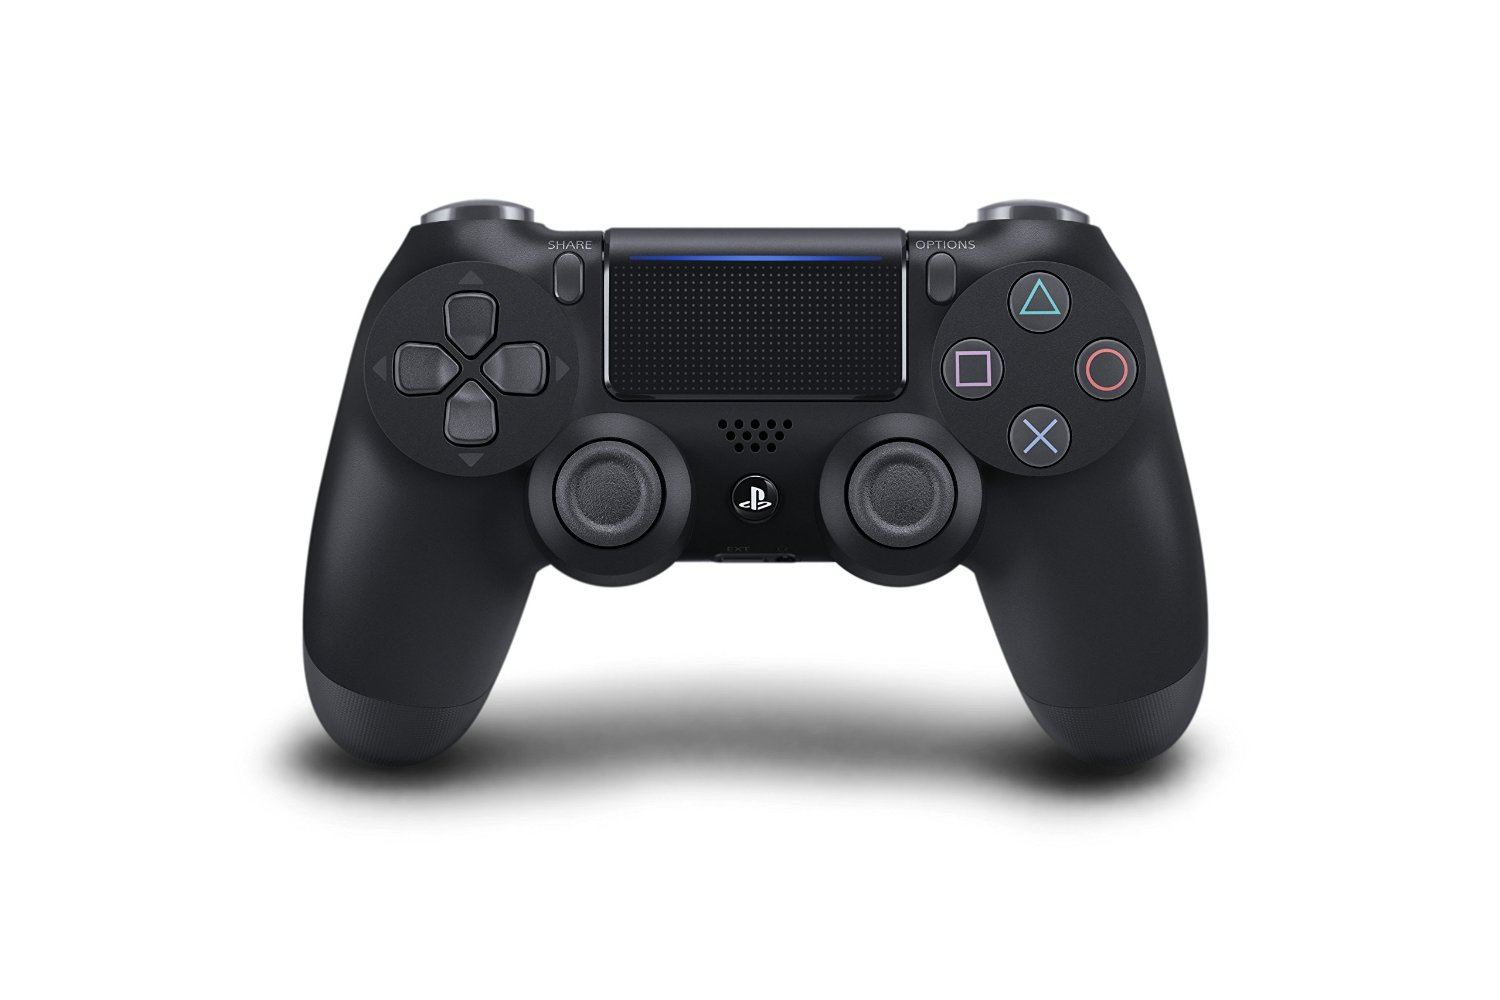 New DualShock 4 CUH-ZCT2 Series (Jet Black) for PlayStation 4 